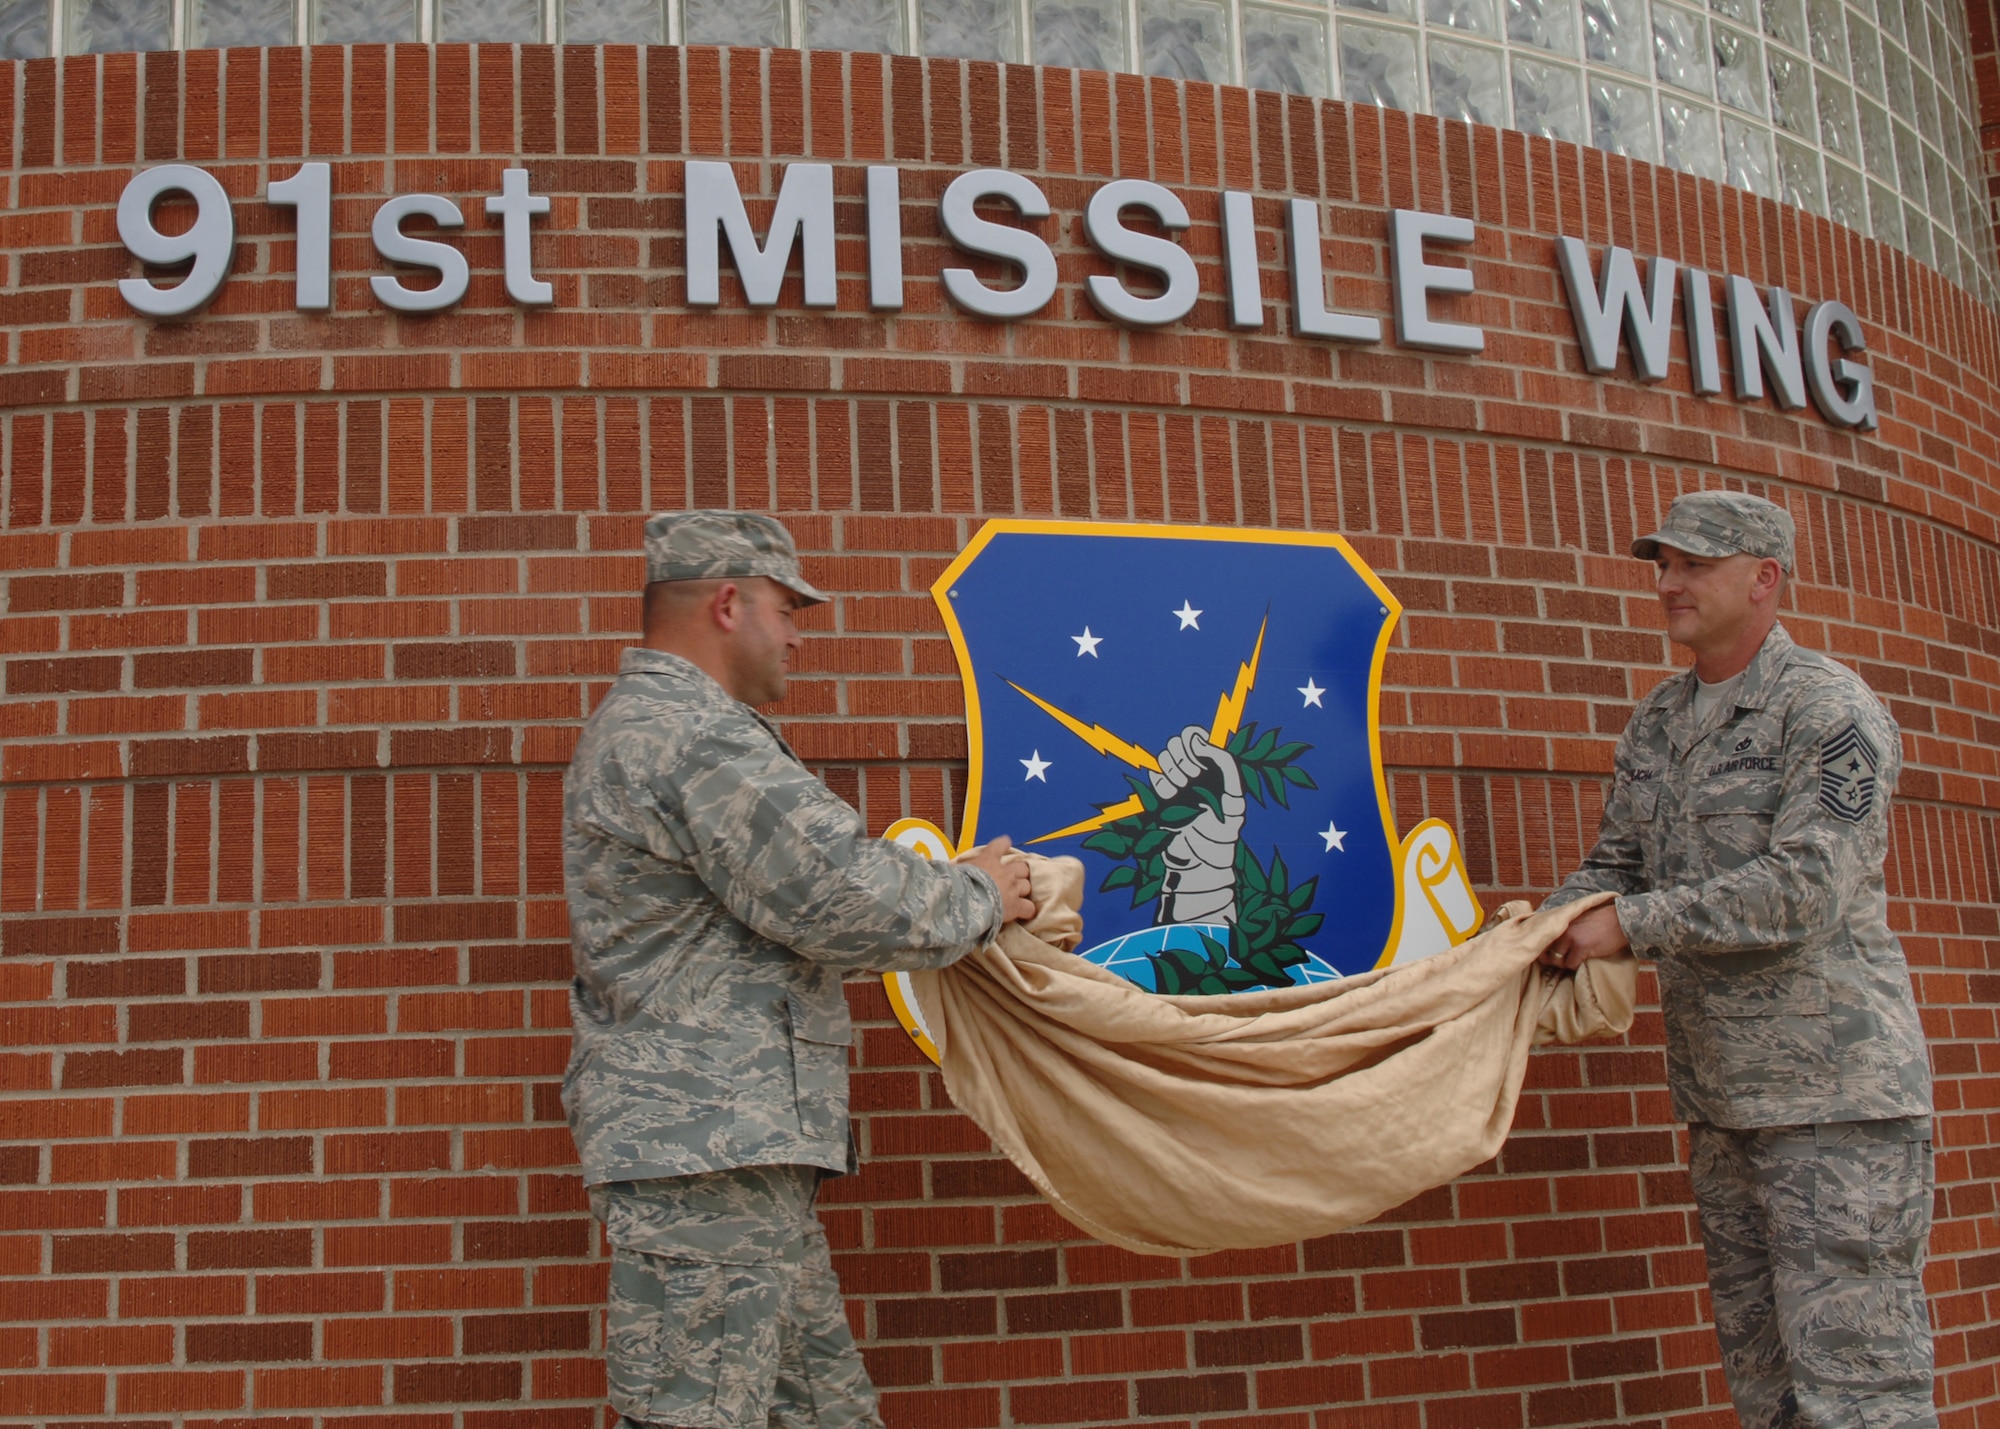 MINOT AIR FORCE BASE, N.D. -- Col. Christopher Ayres , 91st Missile Wing Commander and Chief Master Sgt. Mark Brejcha, 91st MW command chief master sergeant, unveil  the new Missile Wing sign during a redesignation cermony here July 1st. The 91st MW’s mission has been important to the safety and security of our nation for 40 years. (U.S. Air Force photo by Airman 1st Class Sharida Bishop)